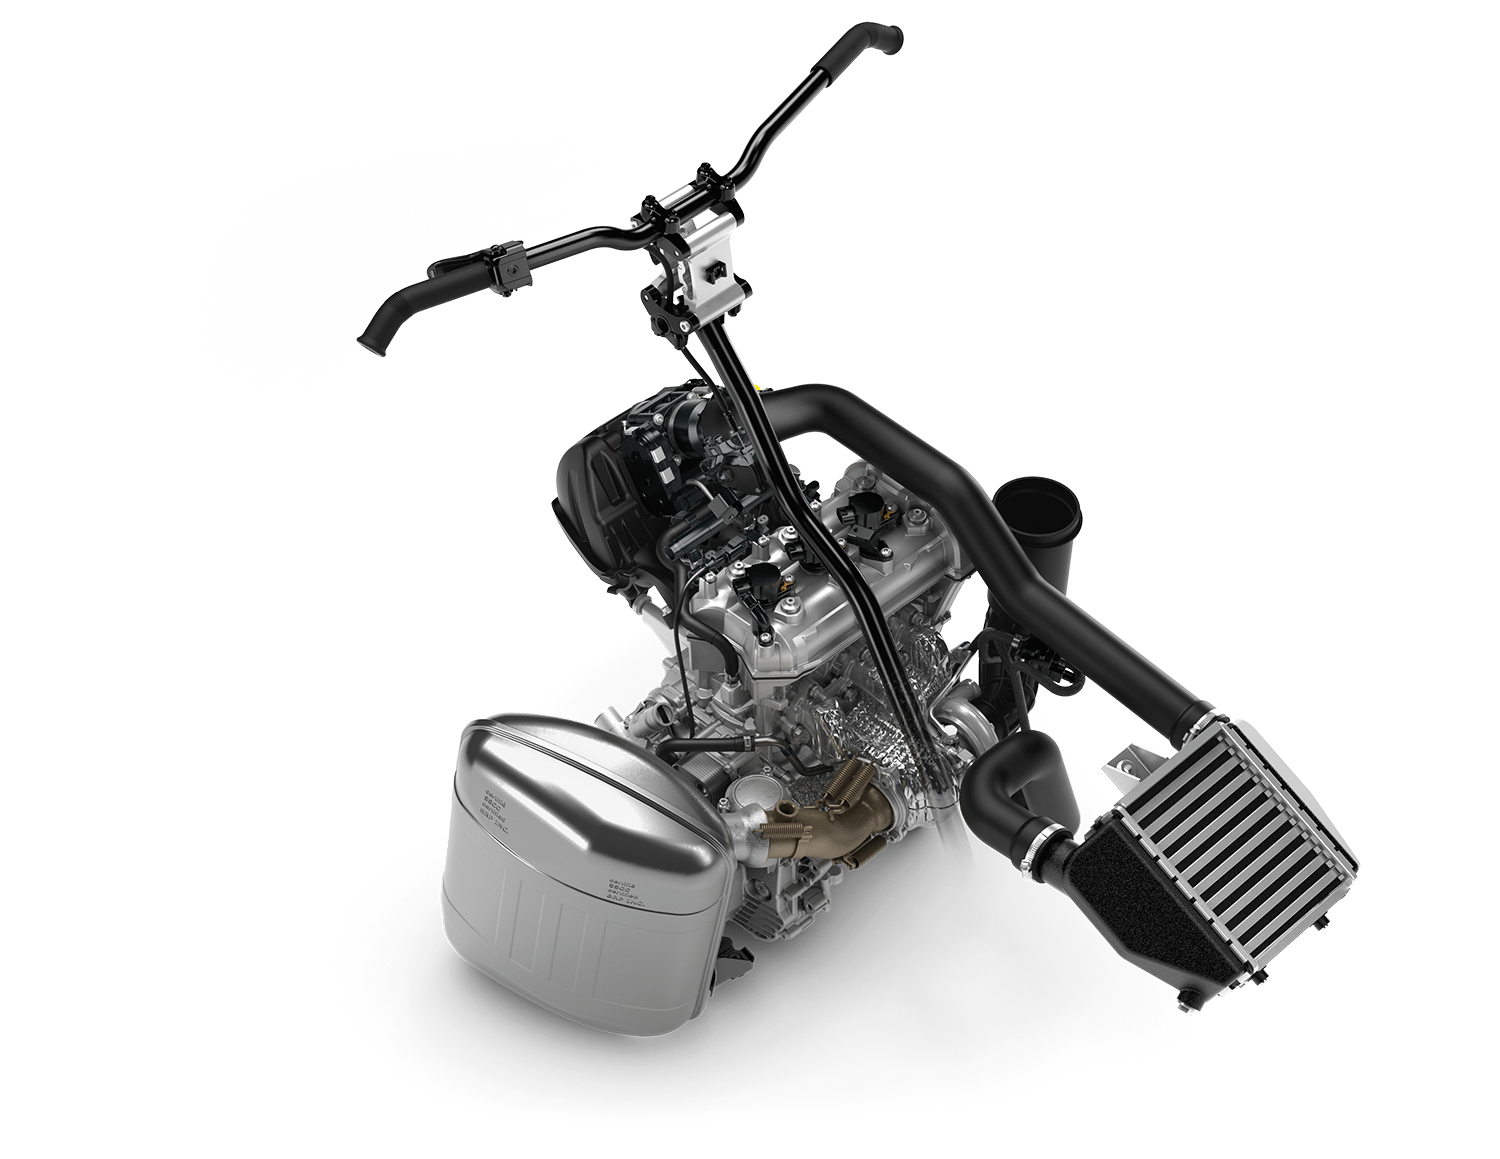 Ultra responsive Rotax engines